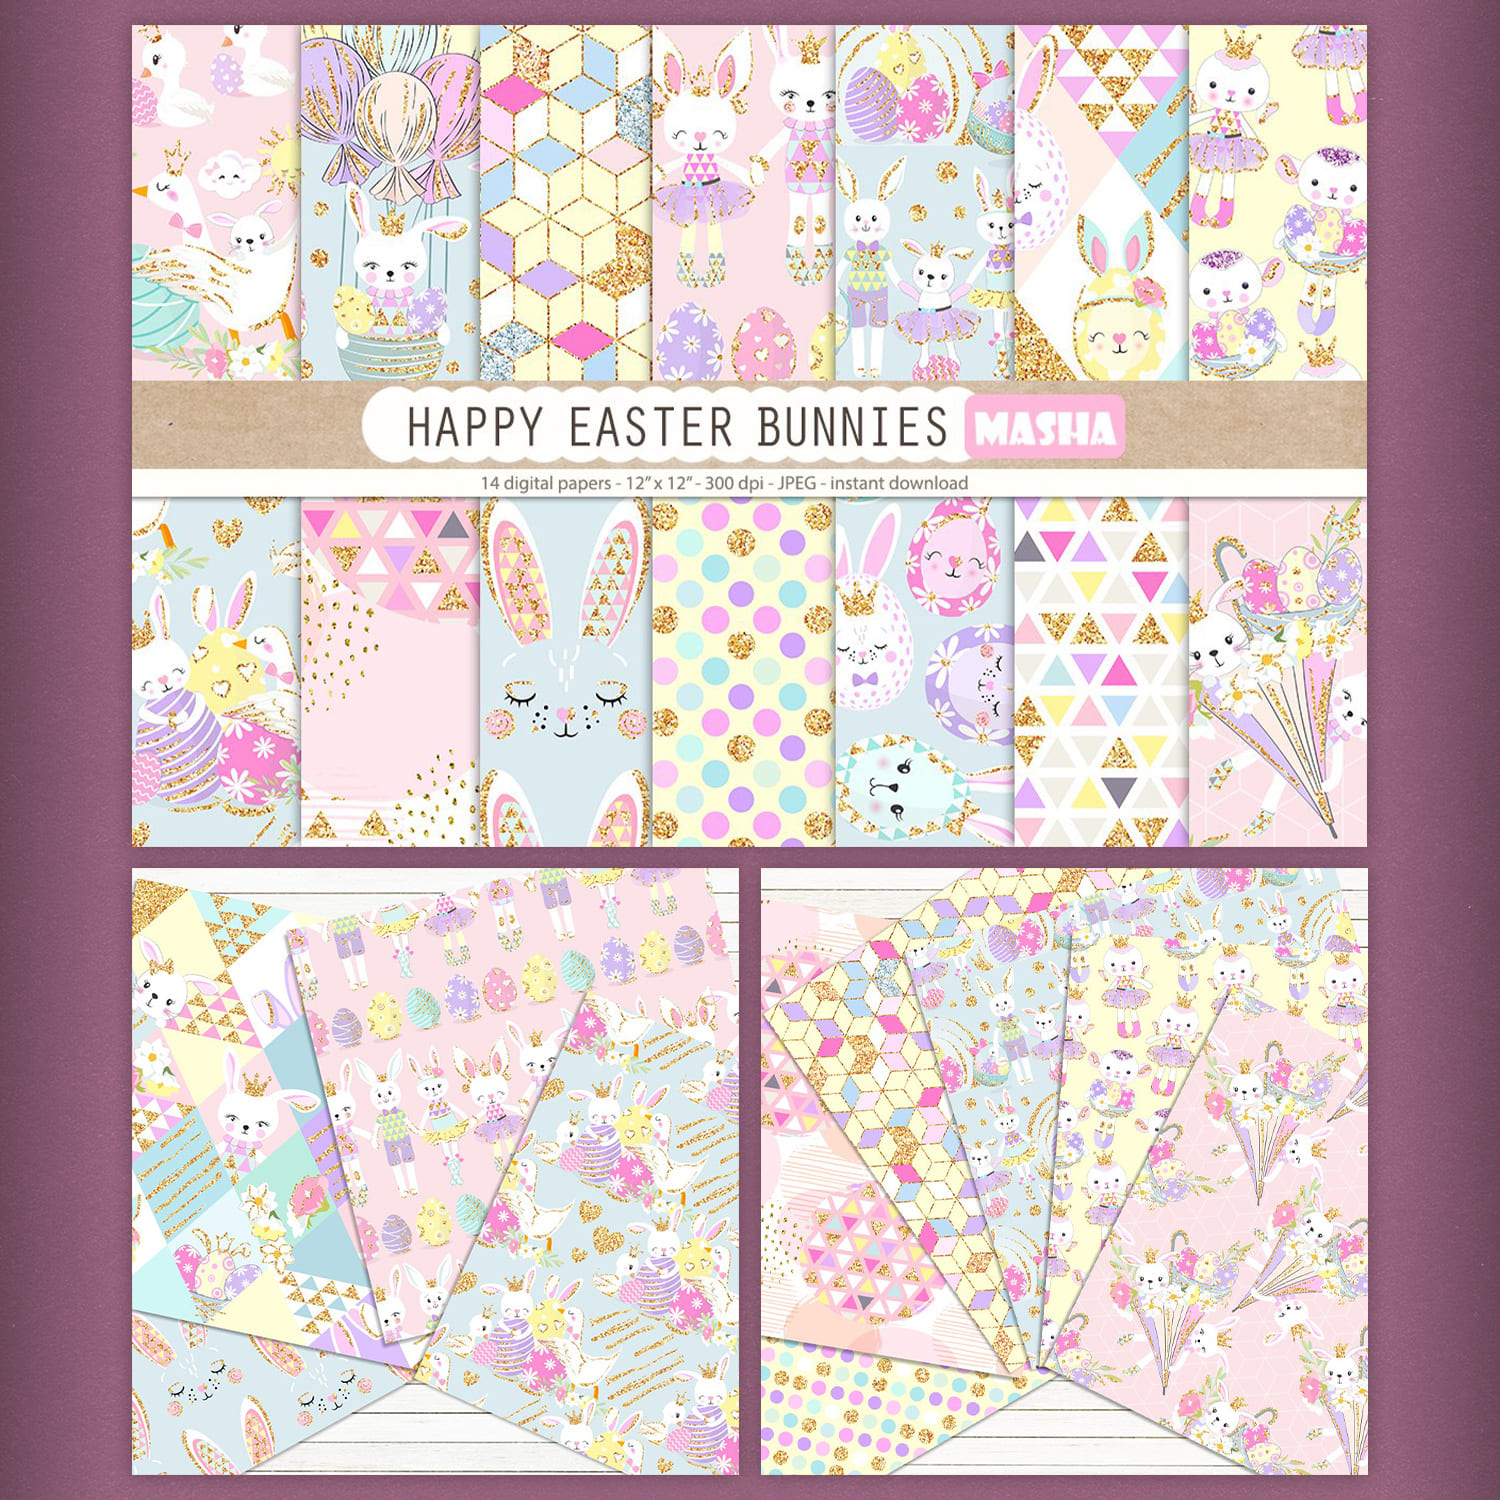 HAPPY EASTER BUNNIES digital papers cover.